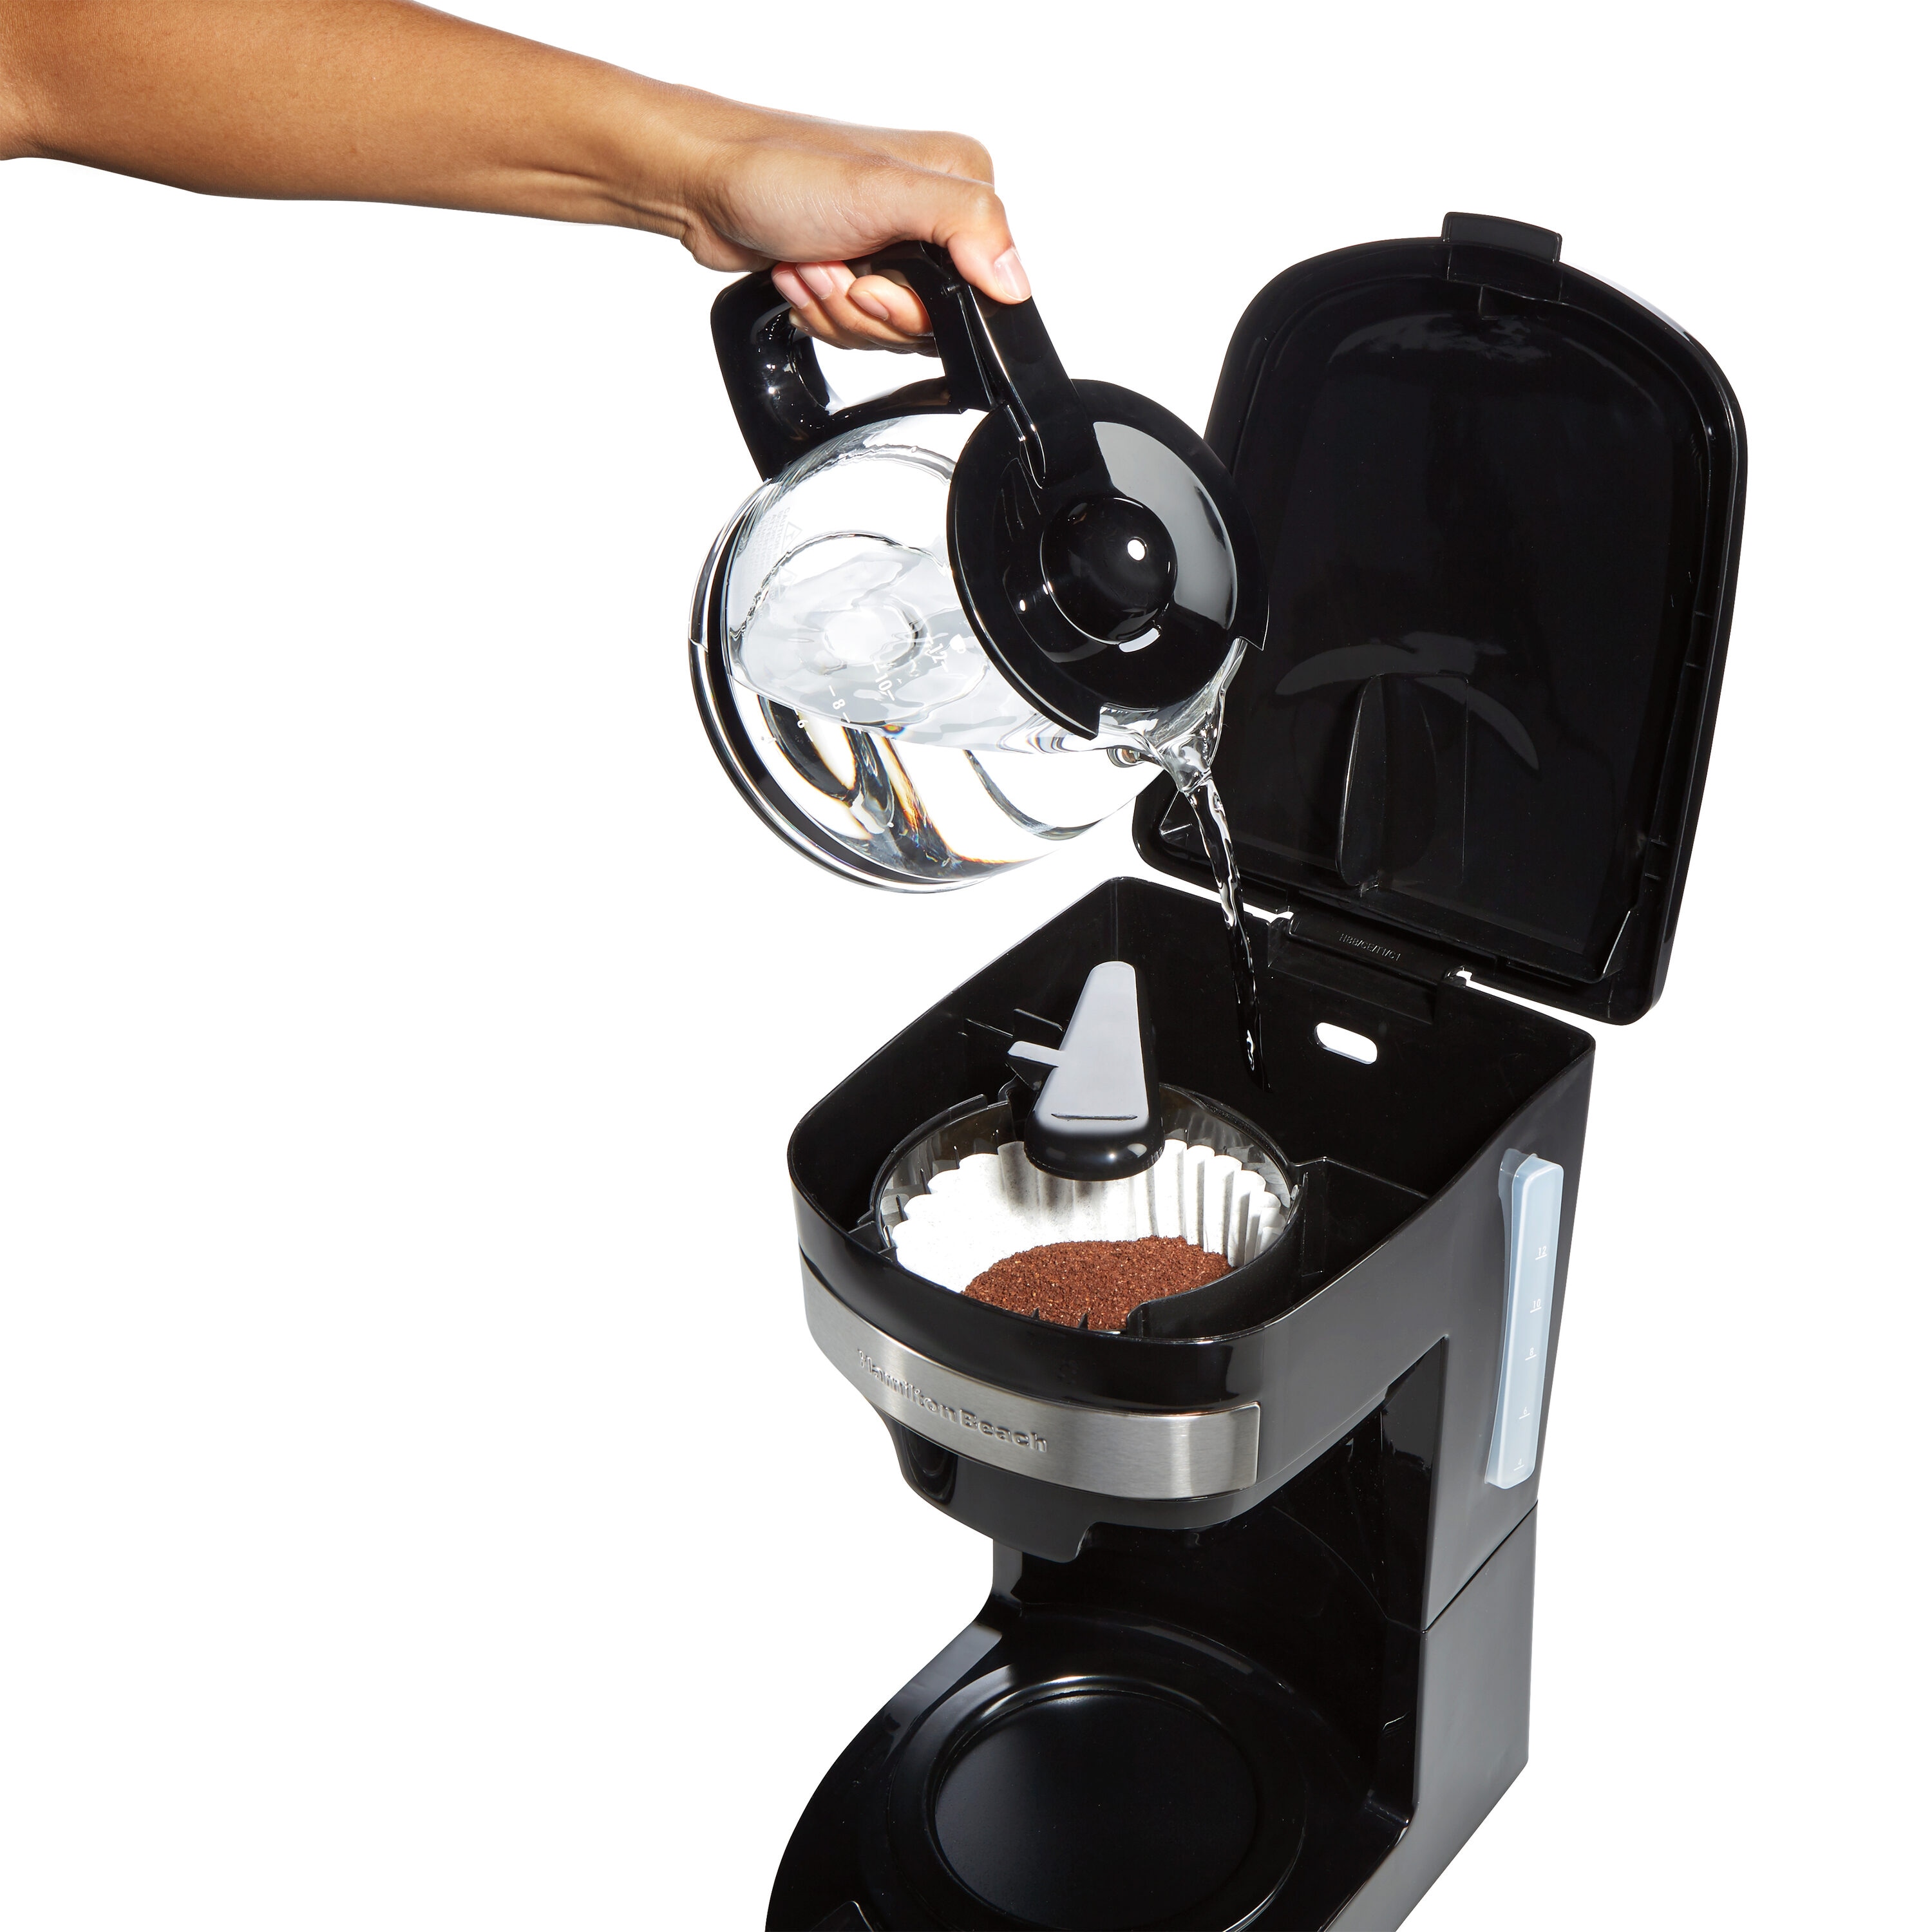 Hamilton Beach FlexBrew Trio 2-Way Works with Alexa Smart Coffee Maker,  Compatible with K-Cup Pods or Grounds, Single Serve or Full 12c Pot, 56 oz.